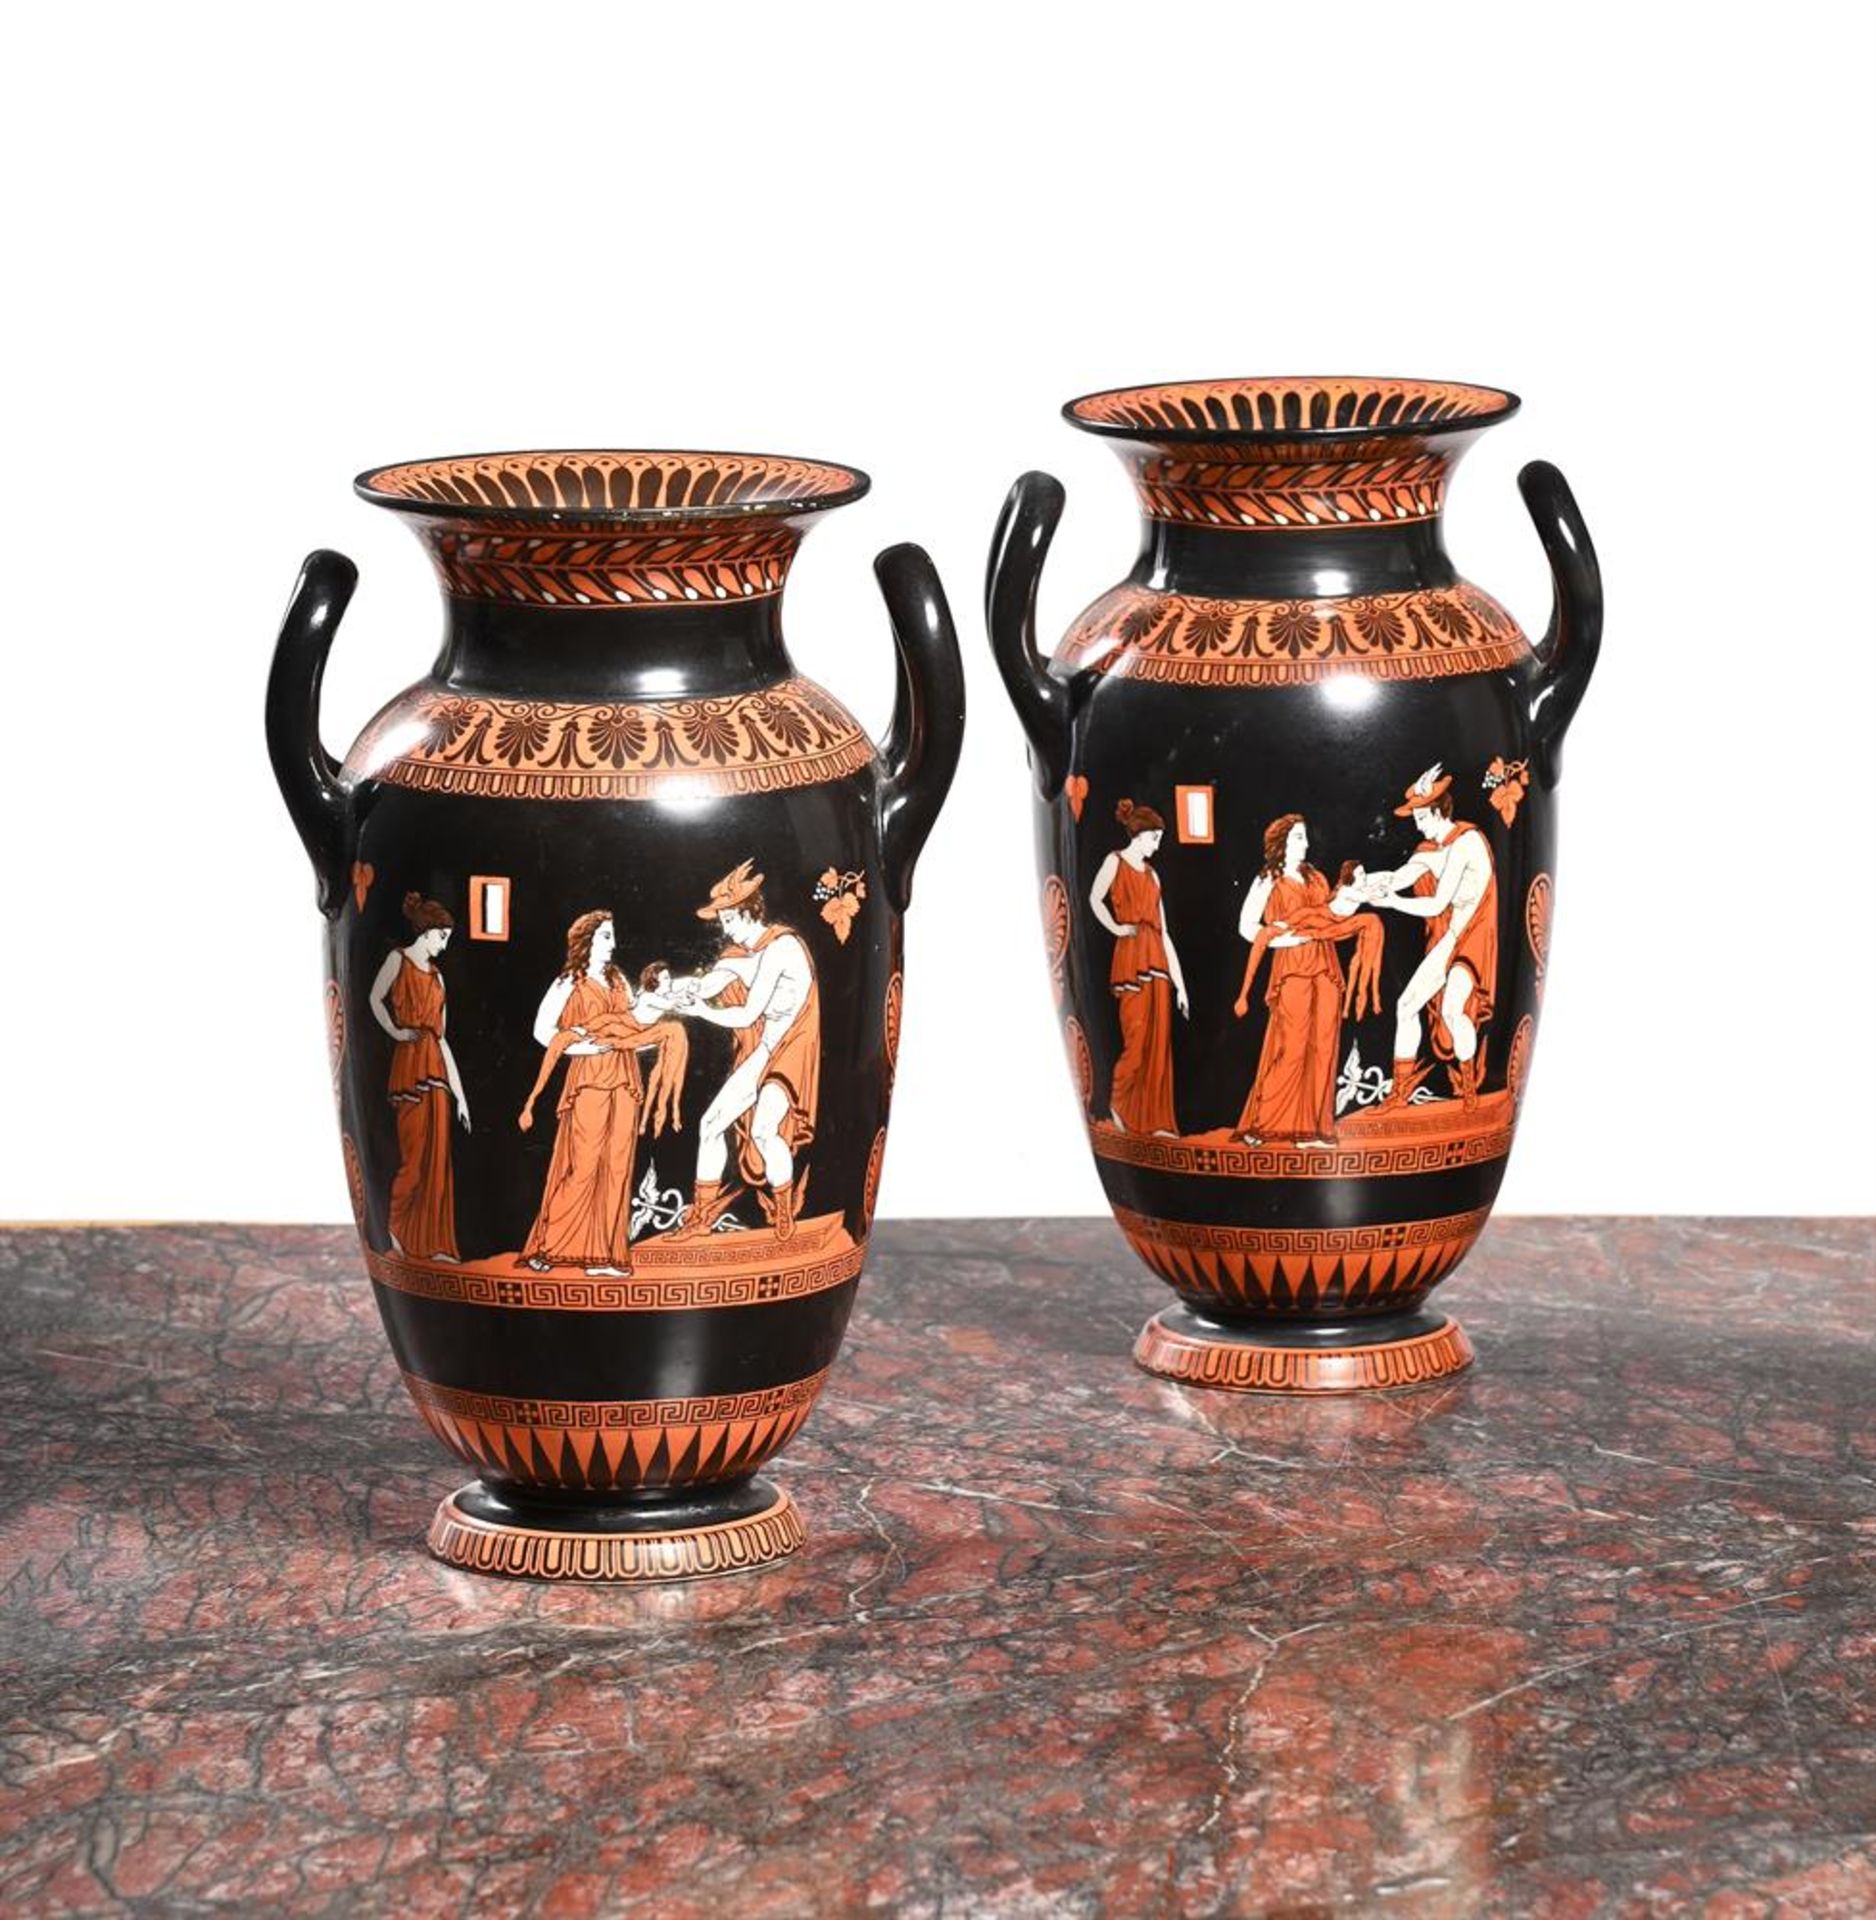 SAMUEL ALCOCK & CO, A PAIR OF ETRUSCAN STYLE VASES, CIRCA 1850-1880 - Image 3 of 4